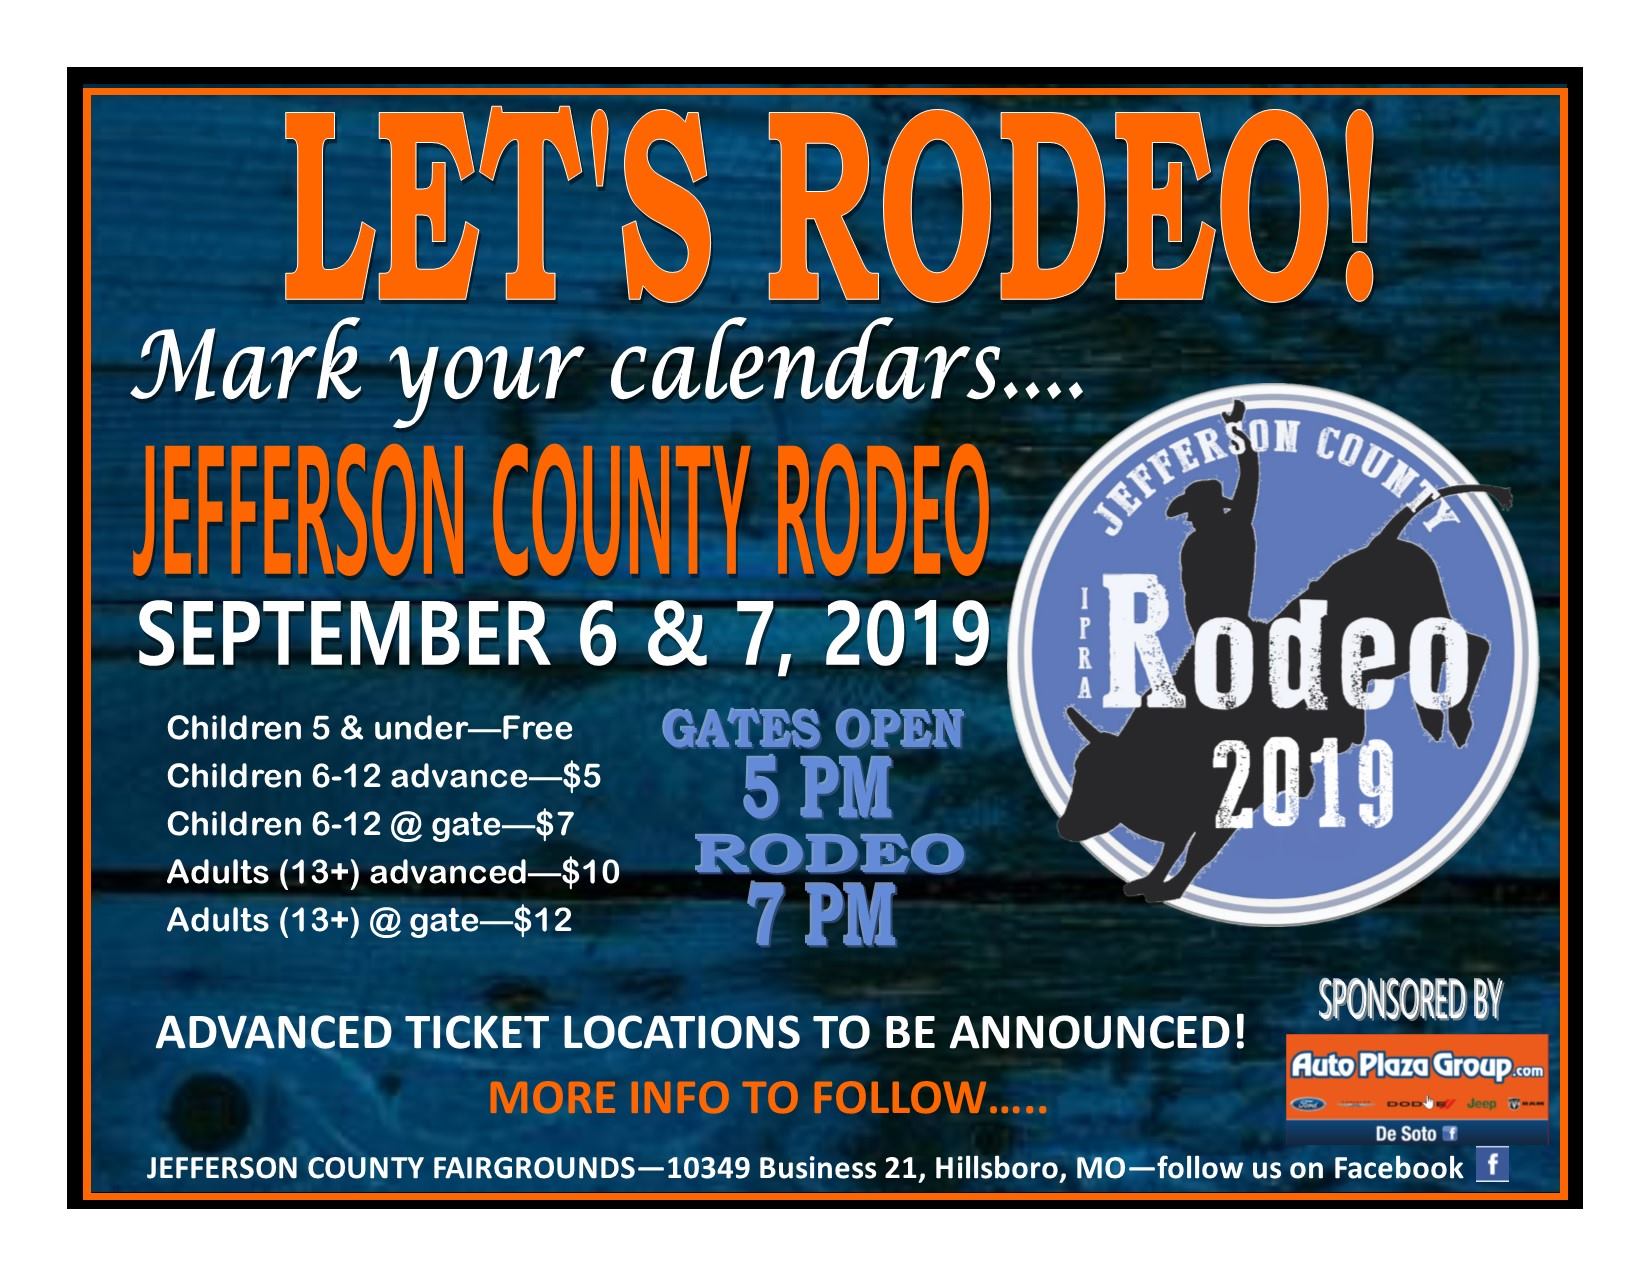 It's Time For The Jefferson County Rodeo! Cardinal Door, Inc.